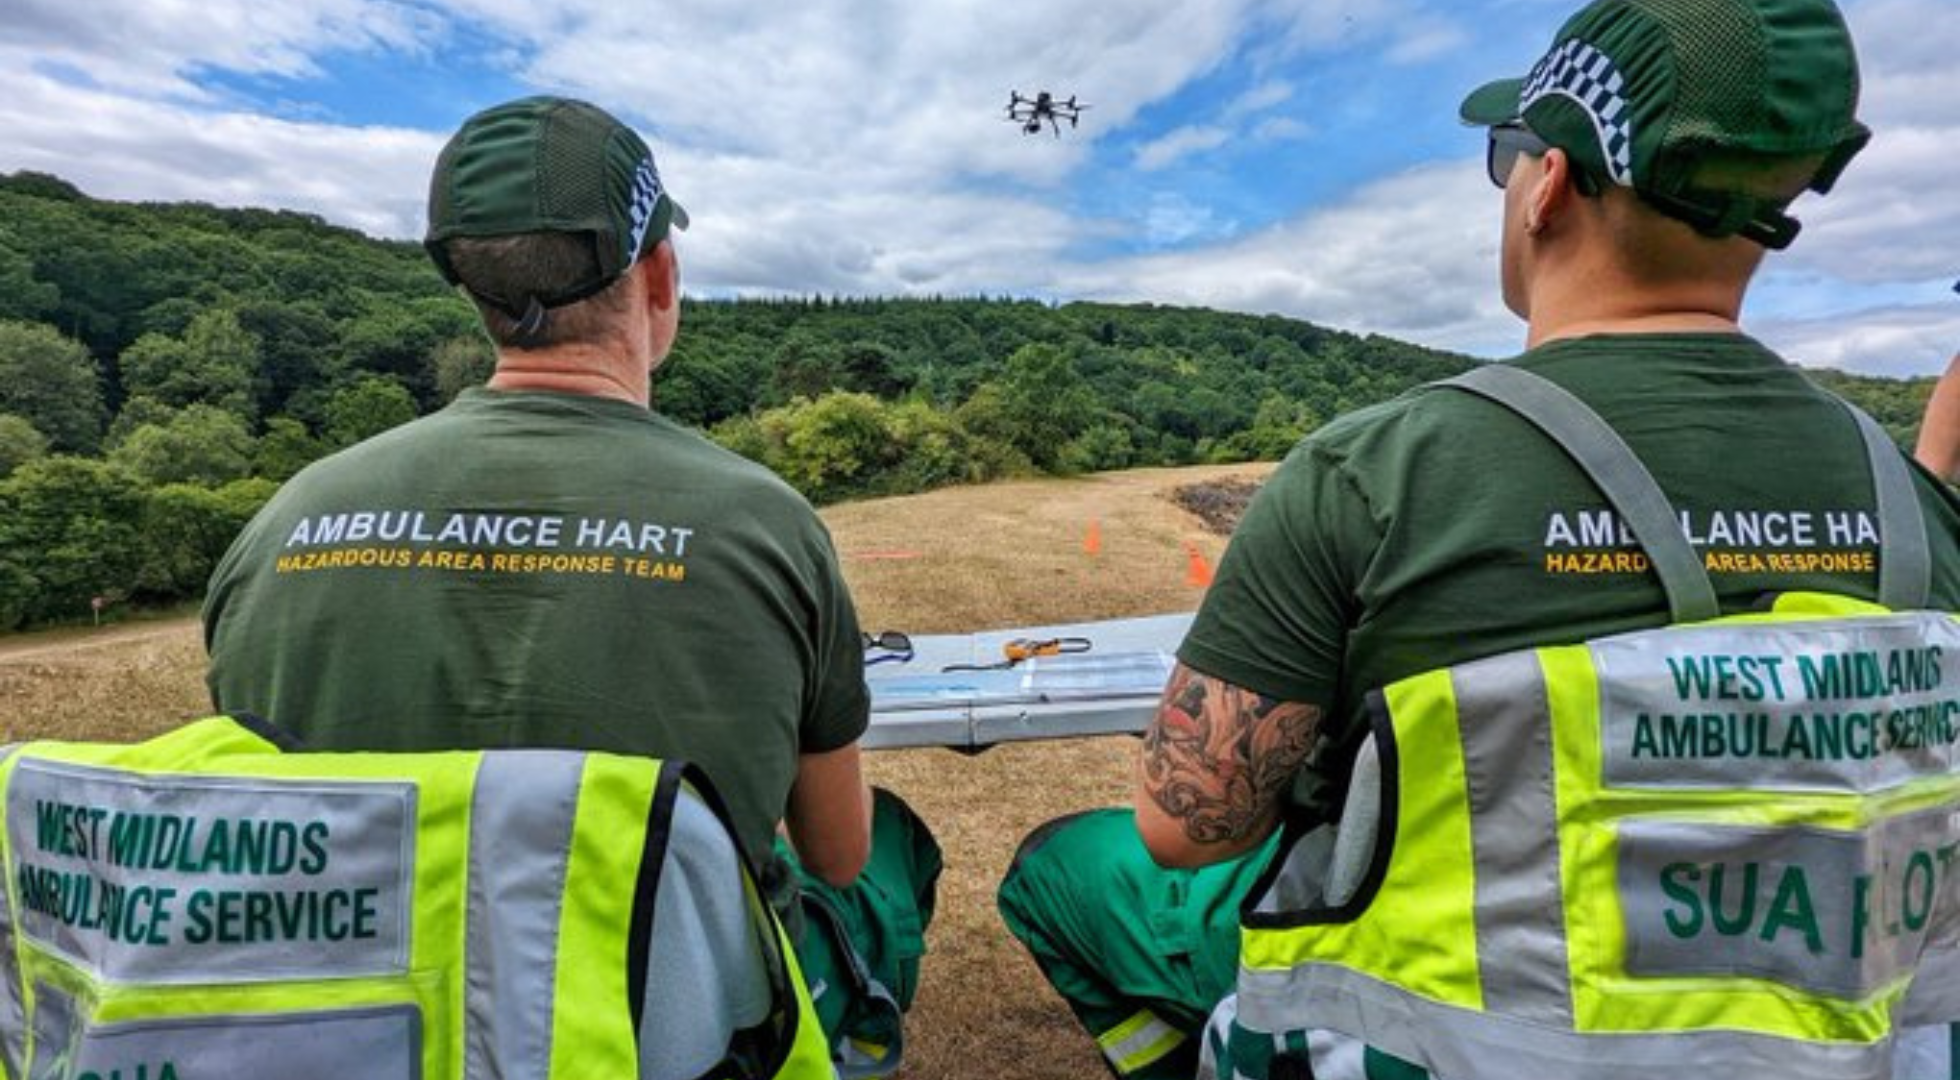 Drone pilots from West Midlands Ambulance Service HART.